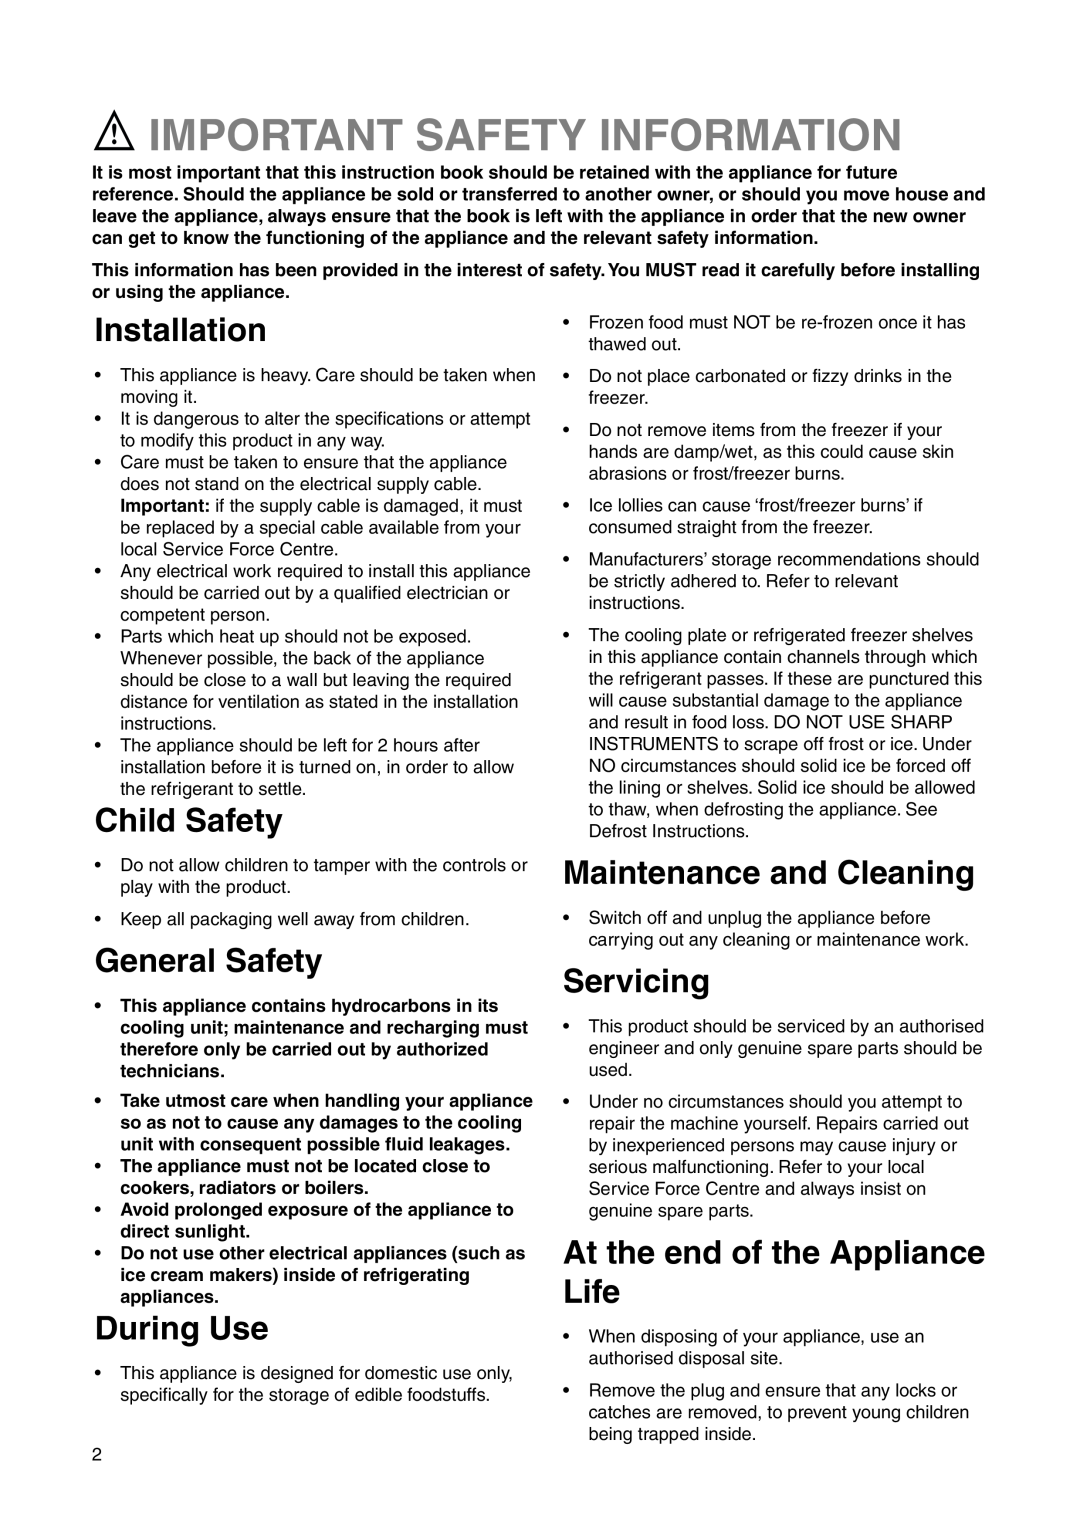 Electrolux ERF 2831 manual Important Safety Information, Installation, Child Safety, General Safety, During Use, Servicing 